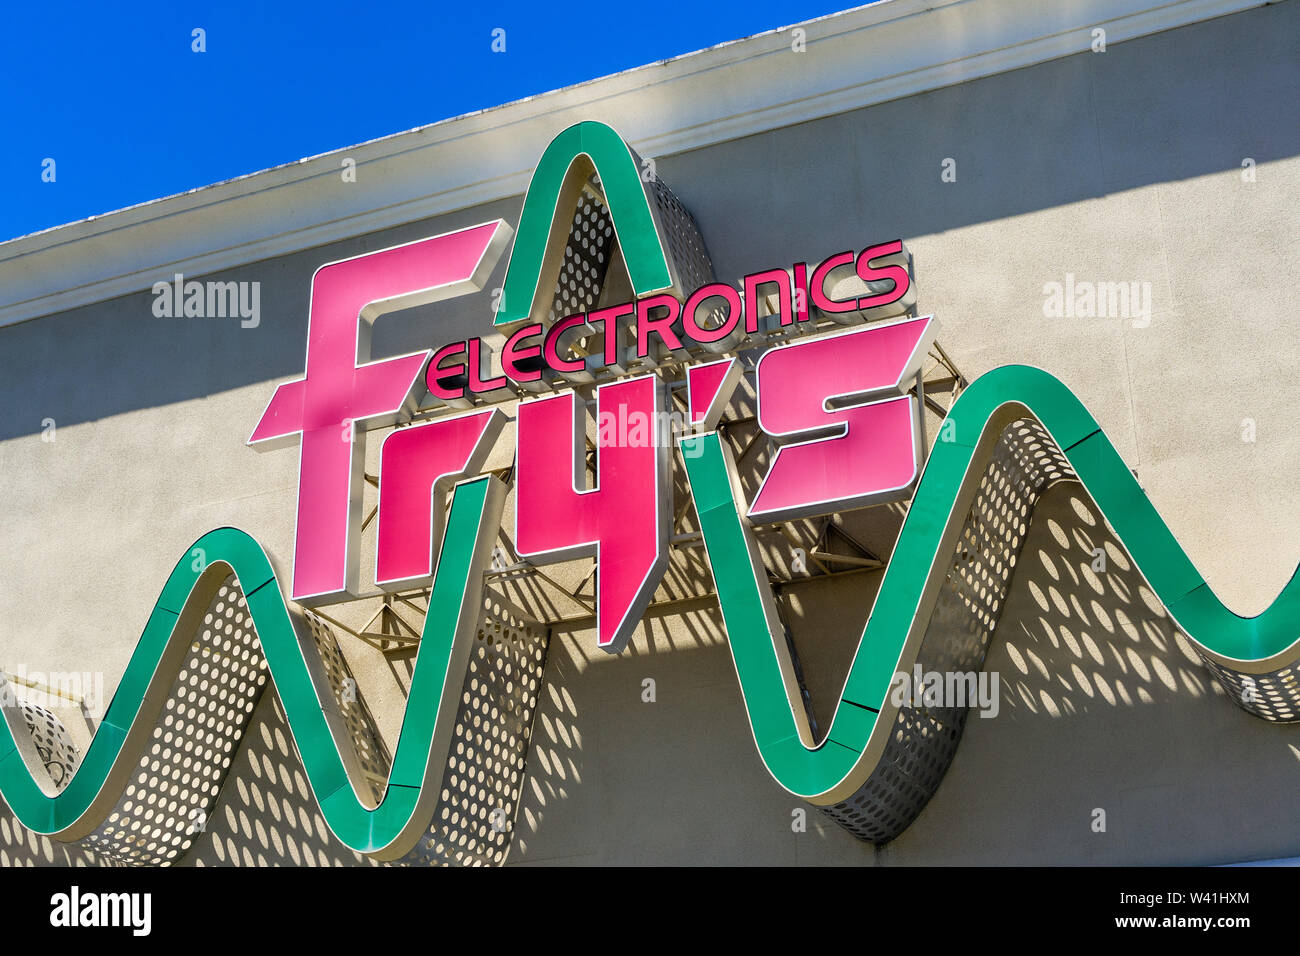 July 12, 2019 Sunnyvale / CA / USA - Fry's Electronics sign on a store front; Fry's Electronics is an American retailer of software, consumer electron Stock Photo